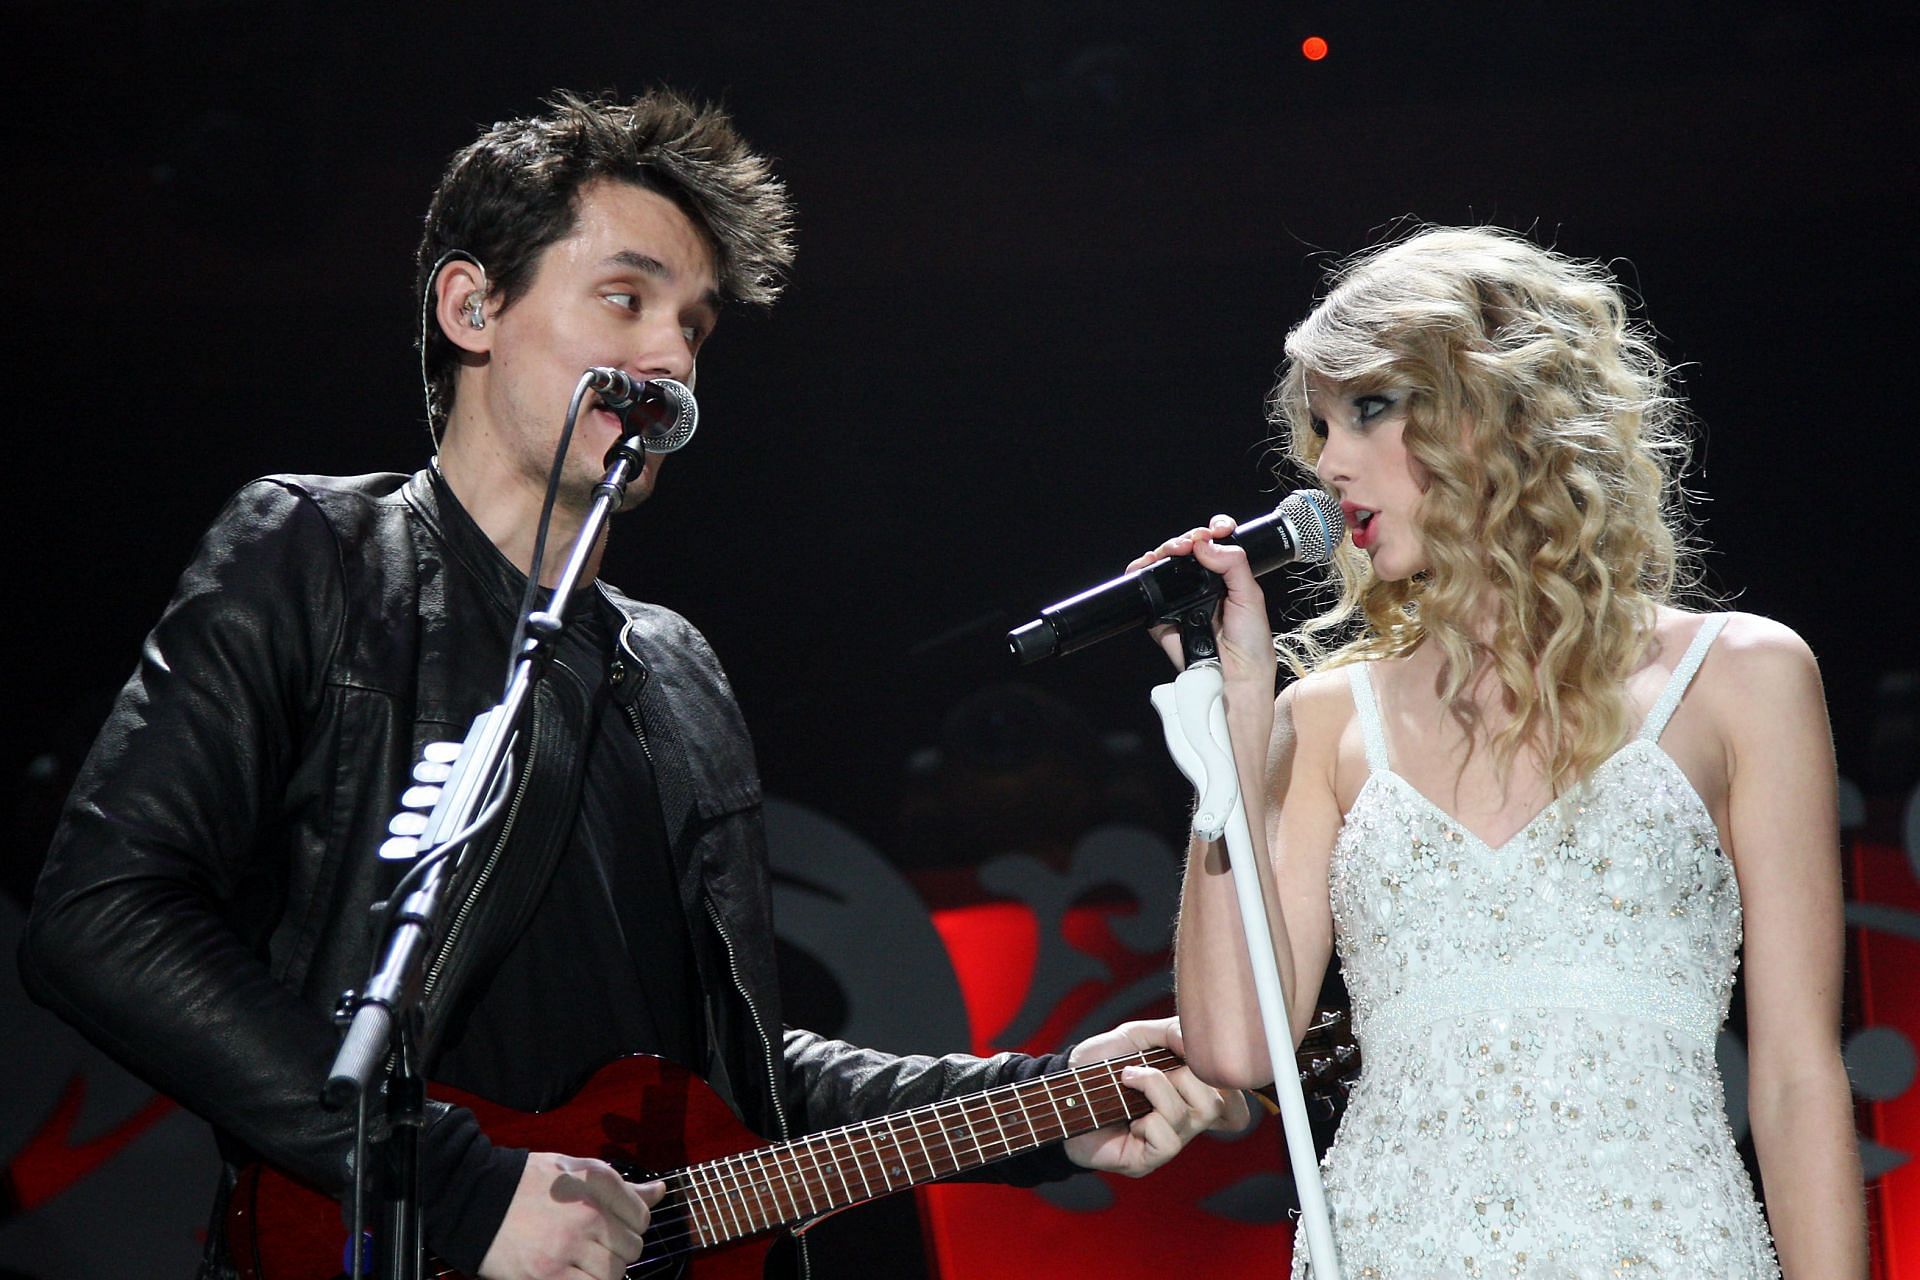 John Mayer and Taylor Swift perform at the Jingle Ball in NYC 2009 (image via Shutter Shock)